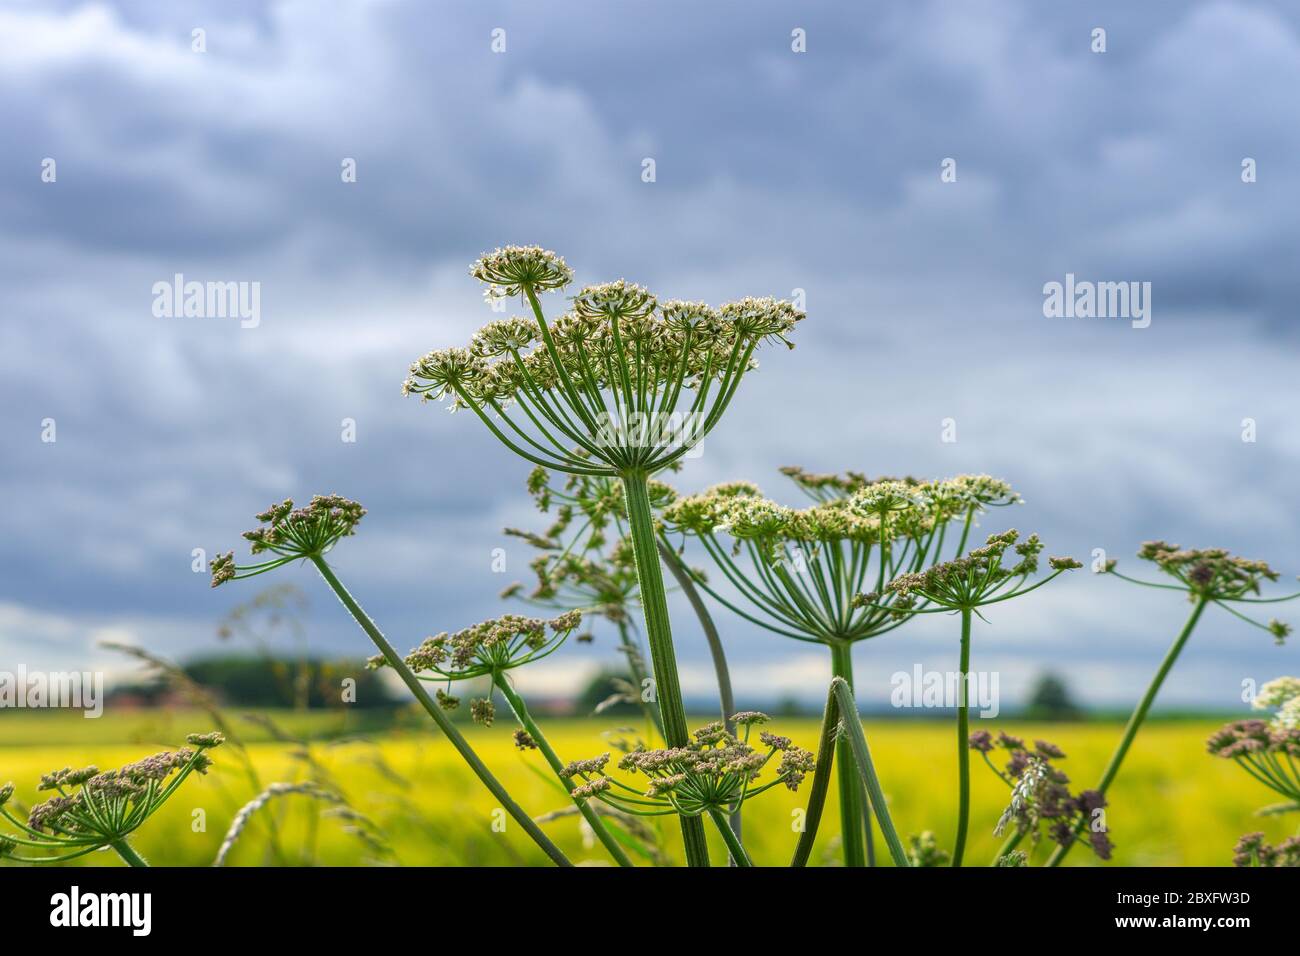 Cow Parsnip or Hogweed on aagainst a cloudy blue sky. It is a herbaceous perennial or biennial plant, in the umbelliferous family Apiaceae that includ Stock Photo